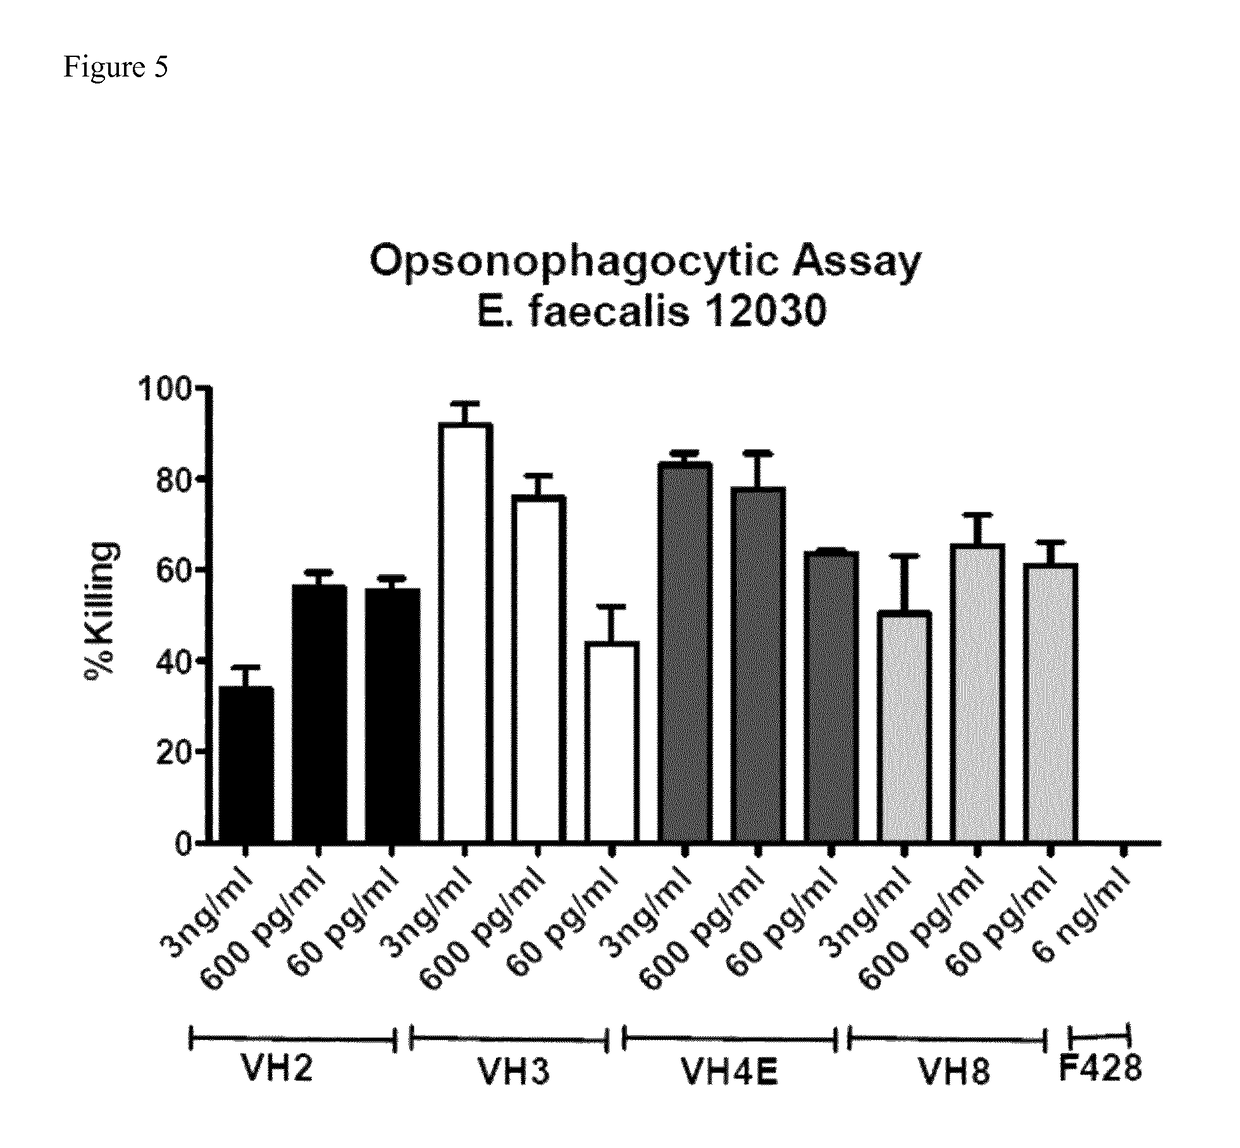 Opsonic and protective monoclonal antibodies against gram-positive pathogens